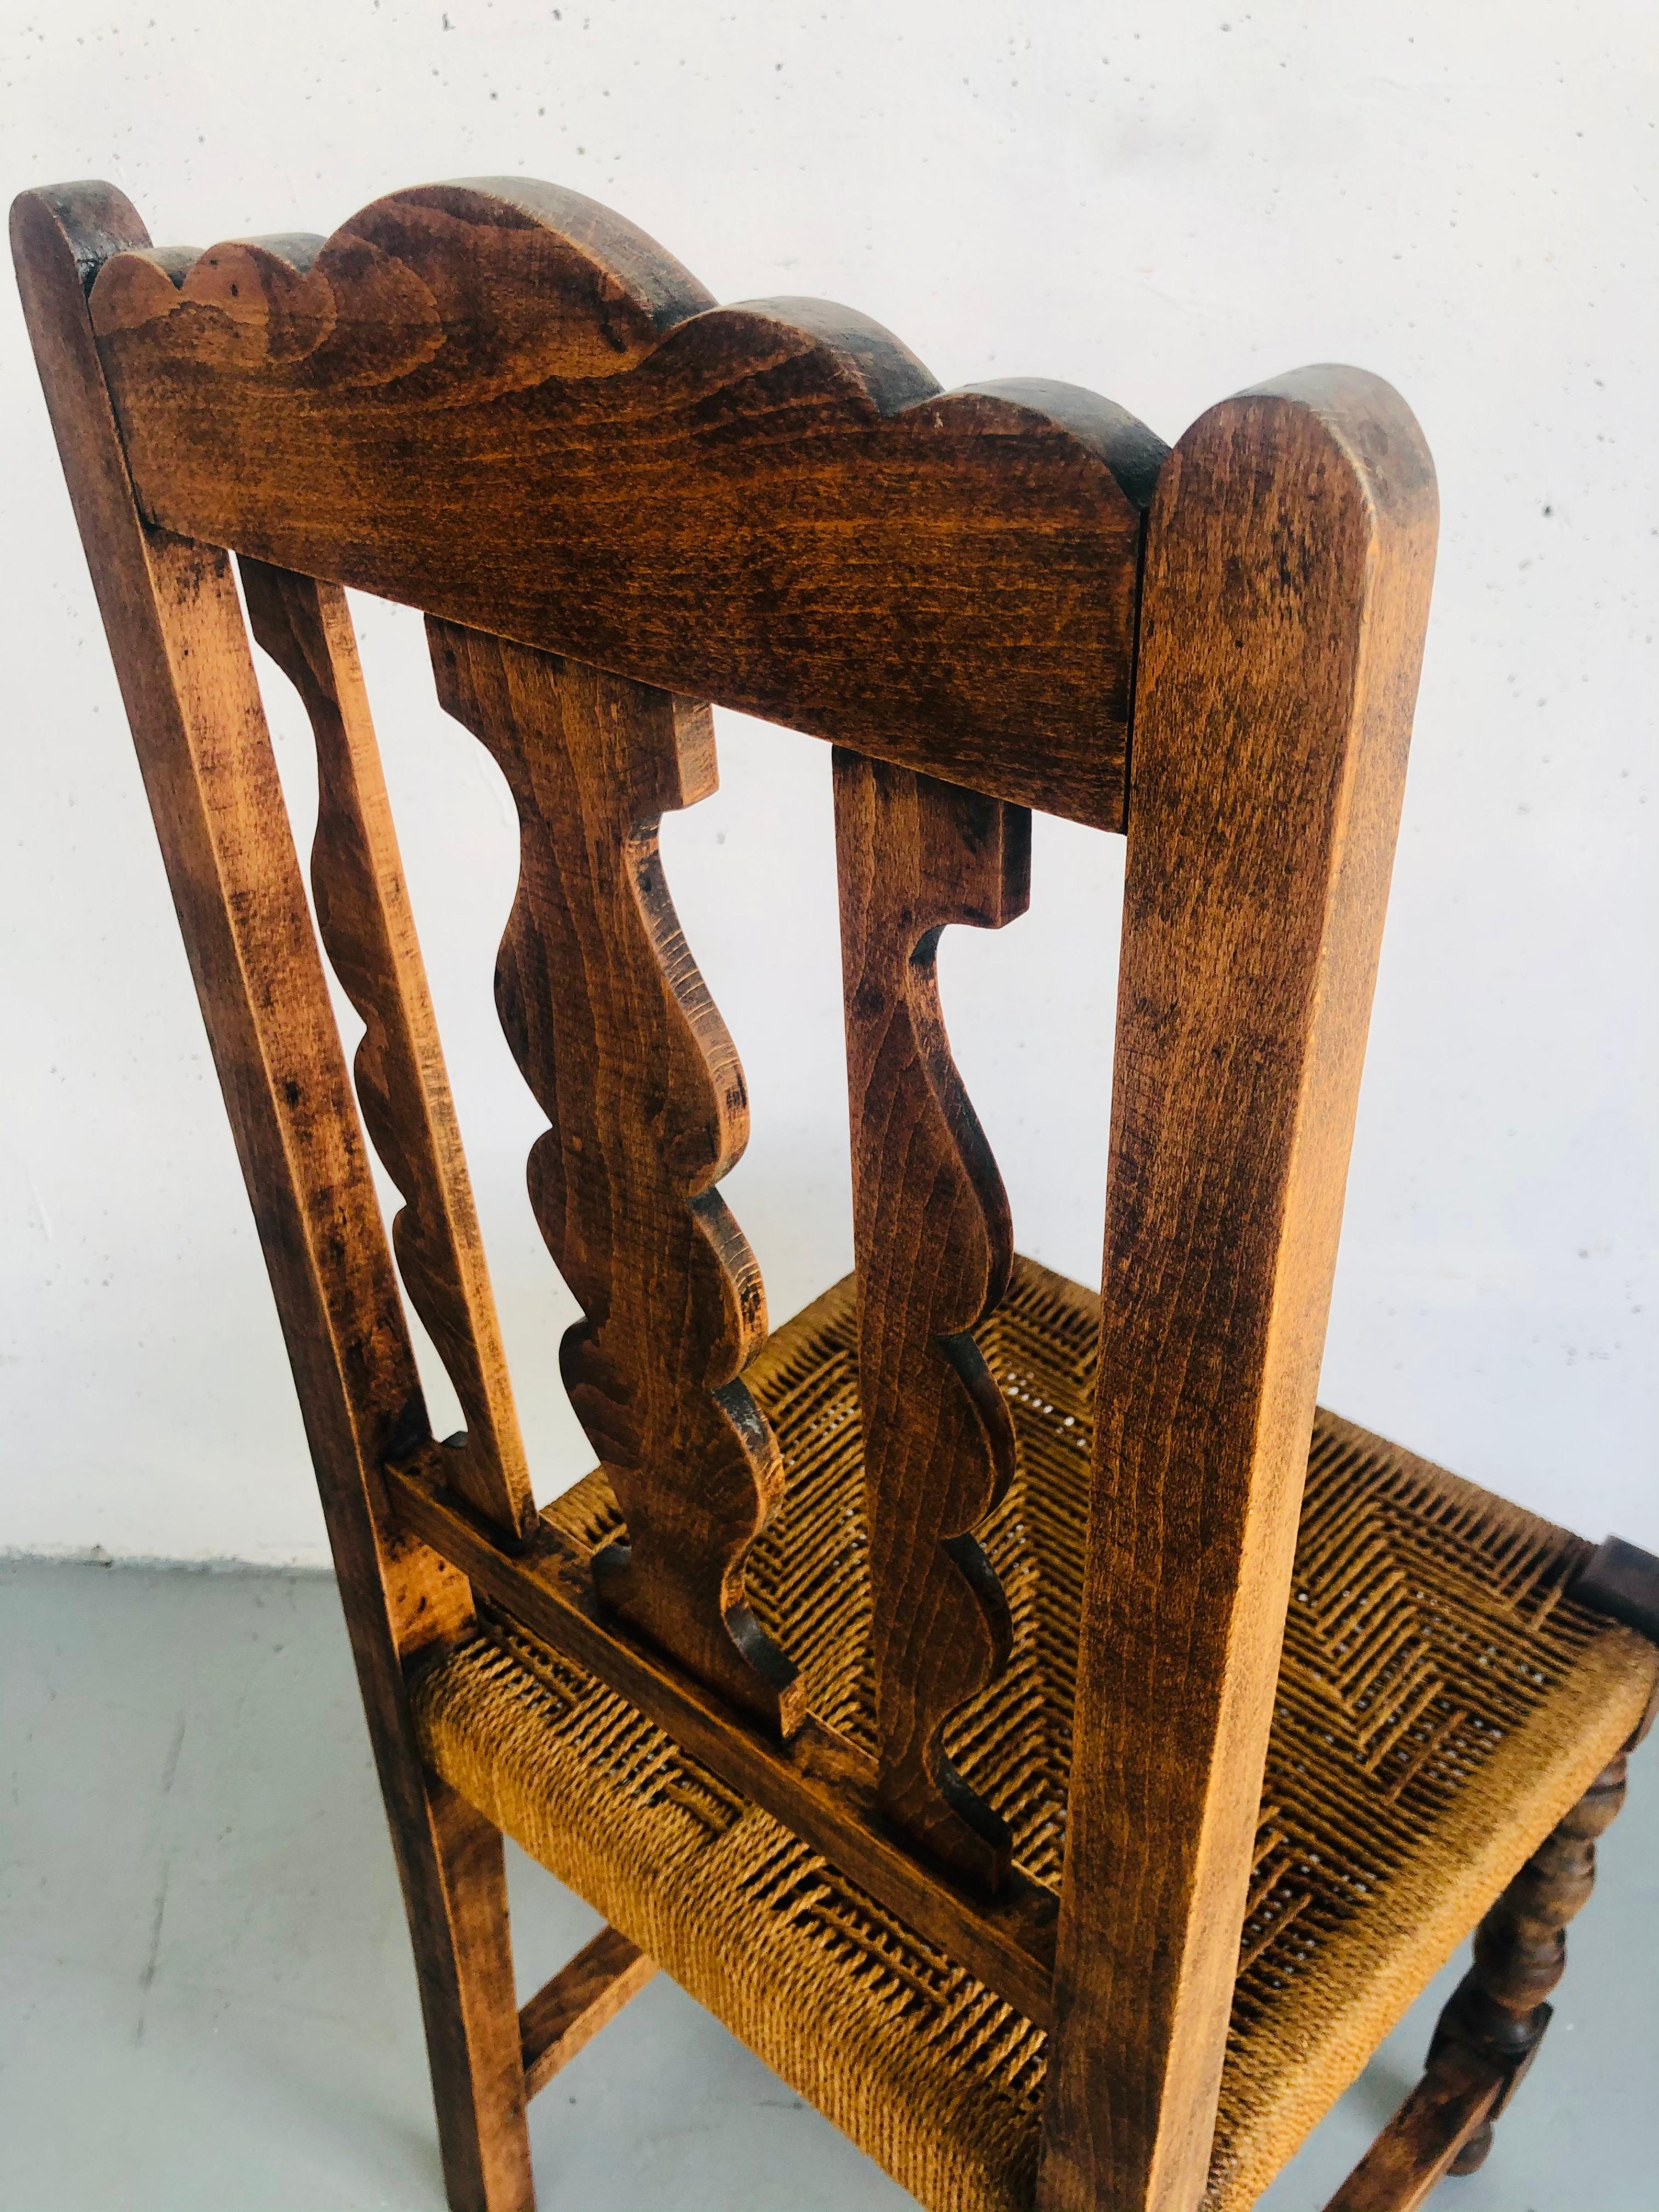 20th Century Vintage Solid Wood and Rope Seat Chair, Spanish Wooden Castilian Style Chair For Sale